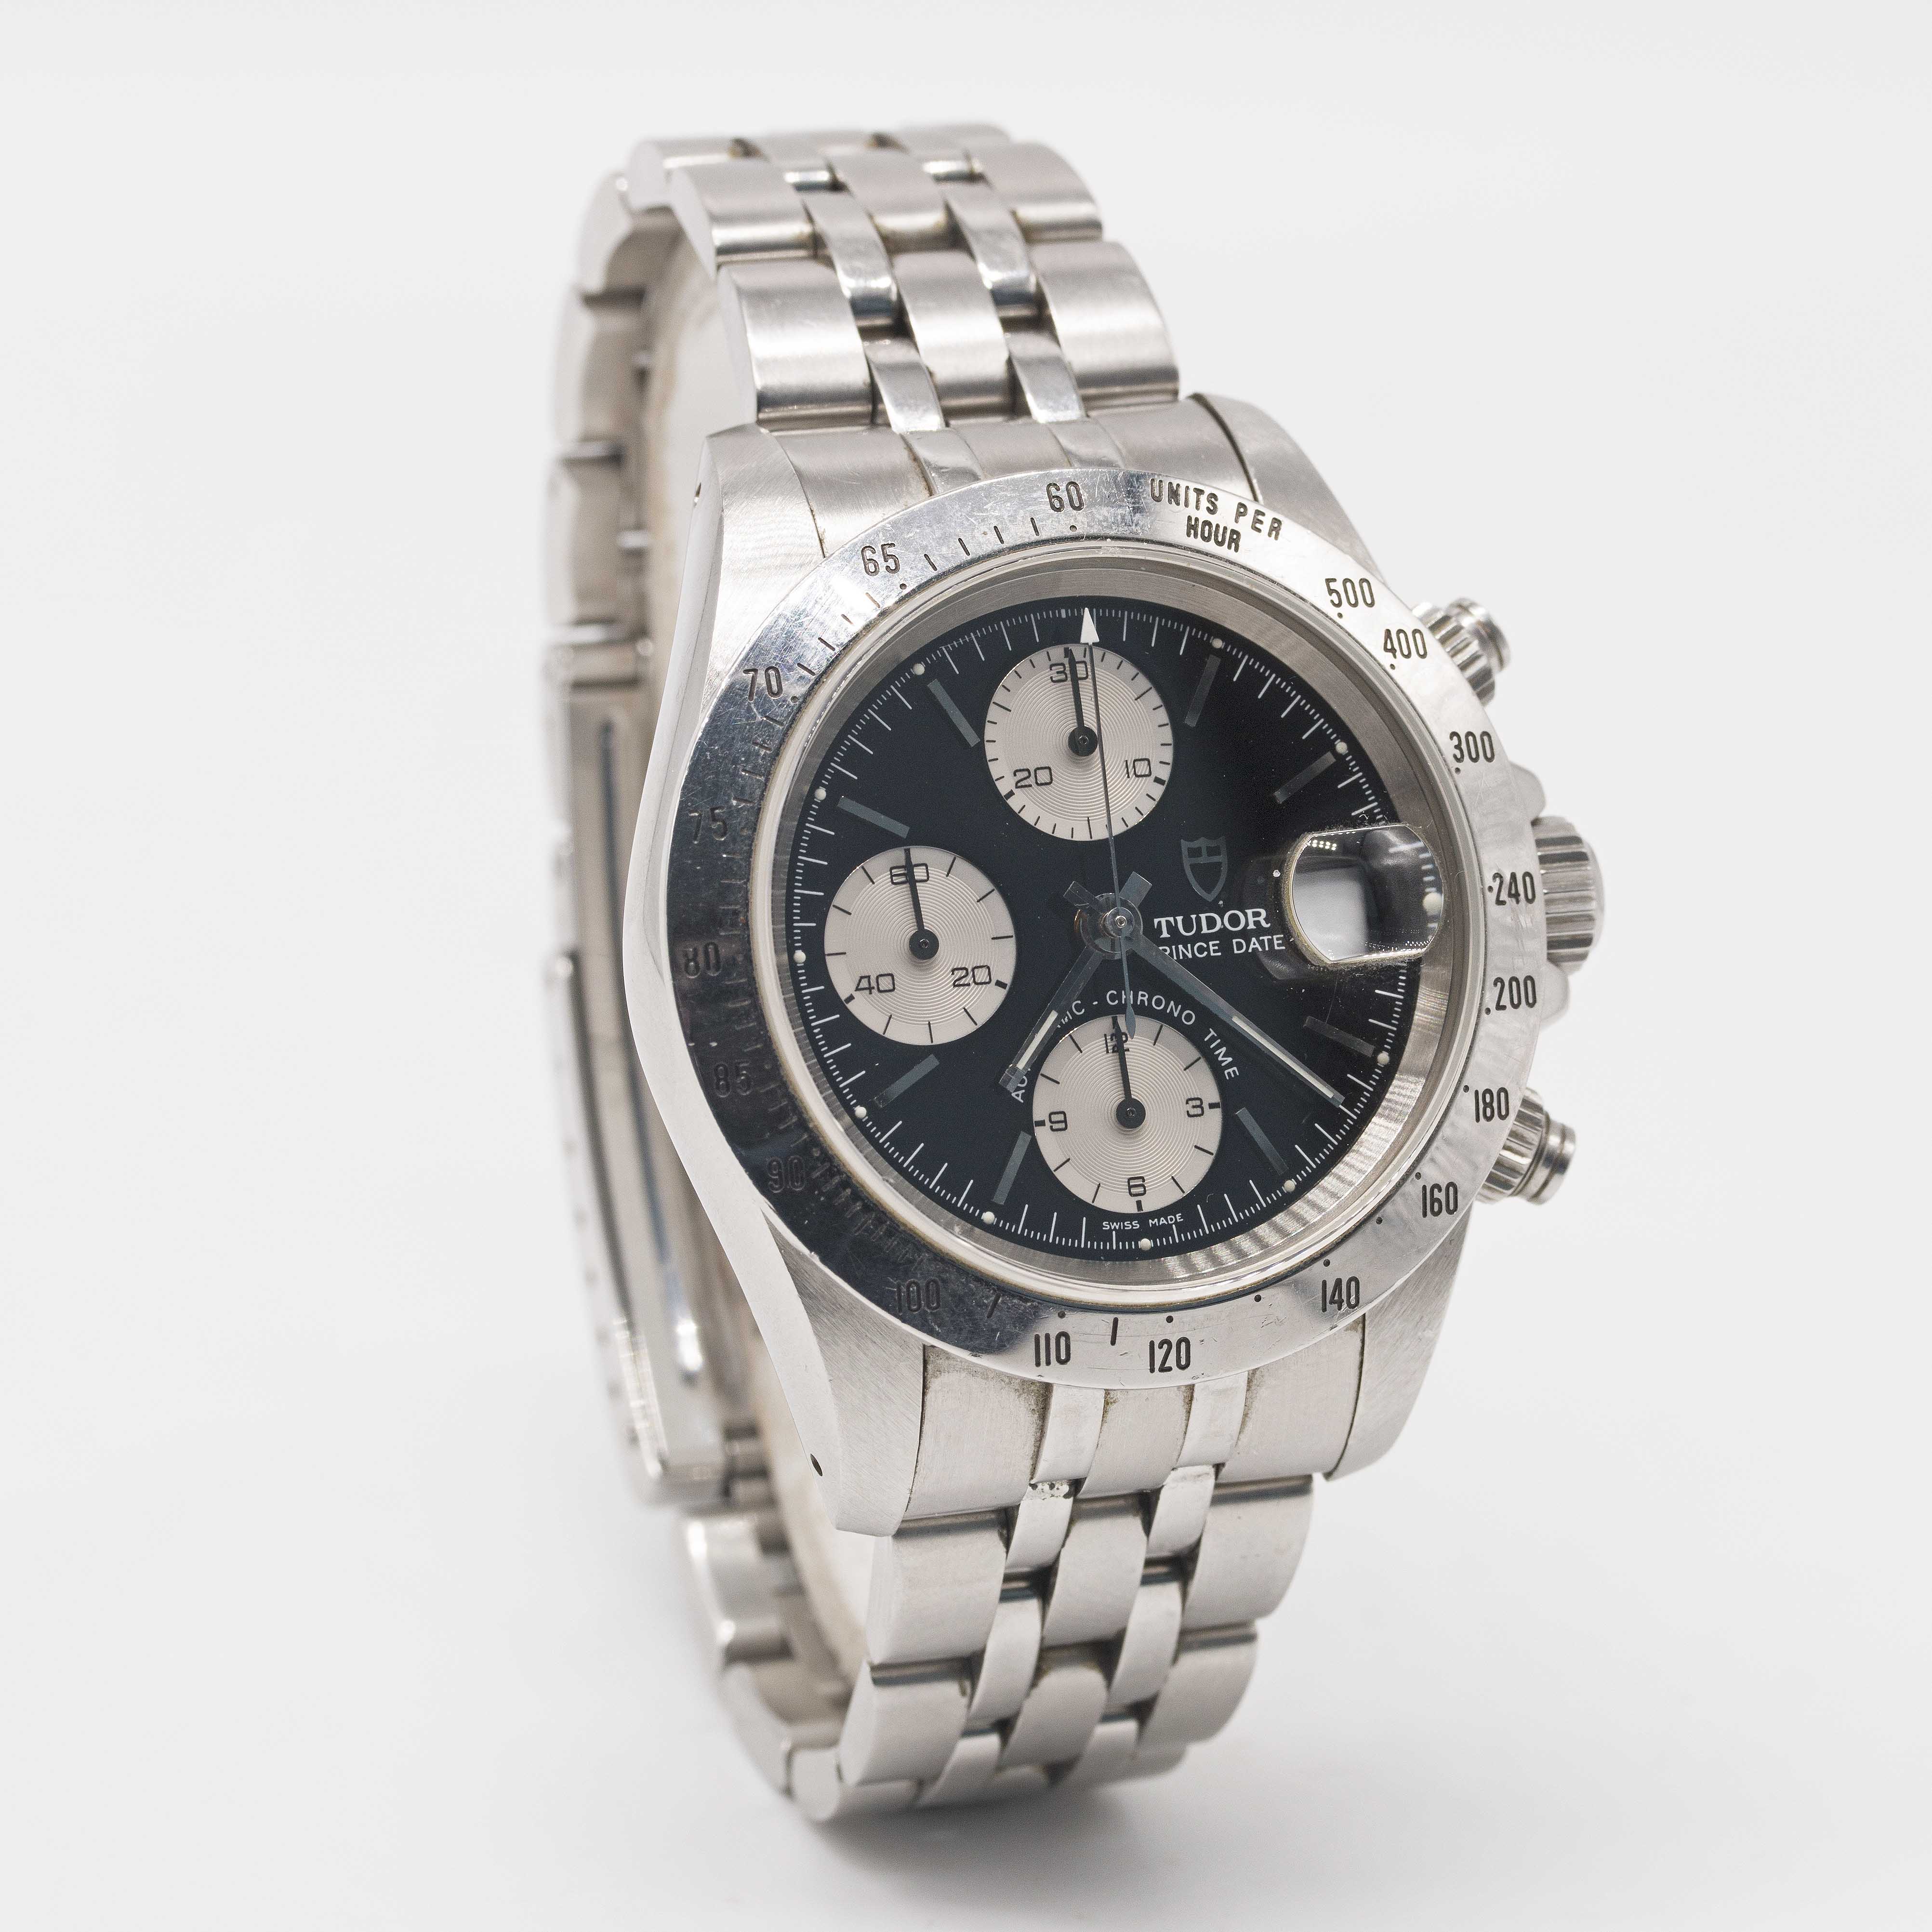 A GENTLEMAN'S STAINLESS STEEL ROLEX TUDOR PRINCE DATE AUTOMATIC CHRONO TIME CHRONOGRAPH BRACELET - Image 4 of 6